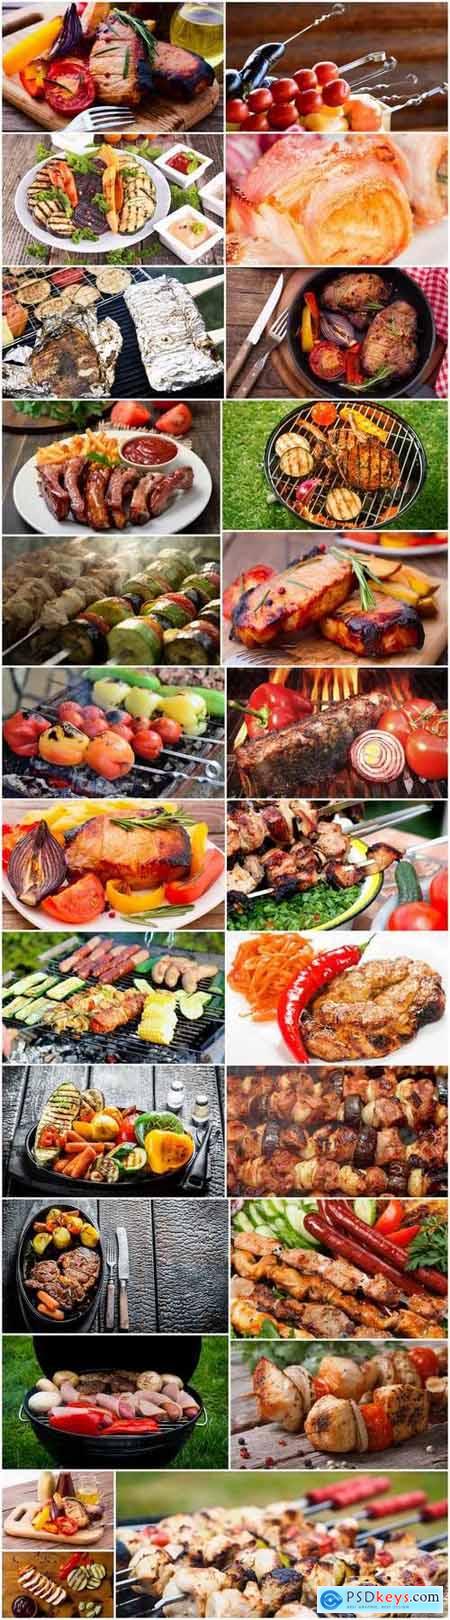 Barbecue grill grilled meat fruit vegetables 25 HQ Jpeg